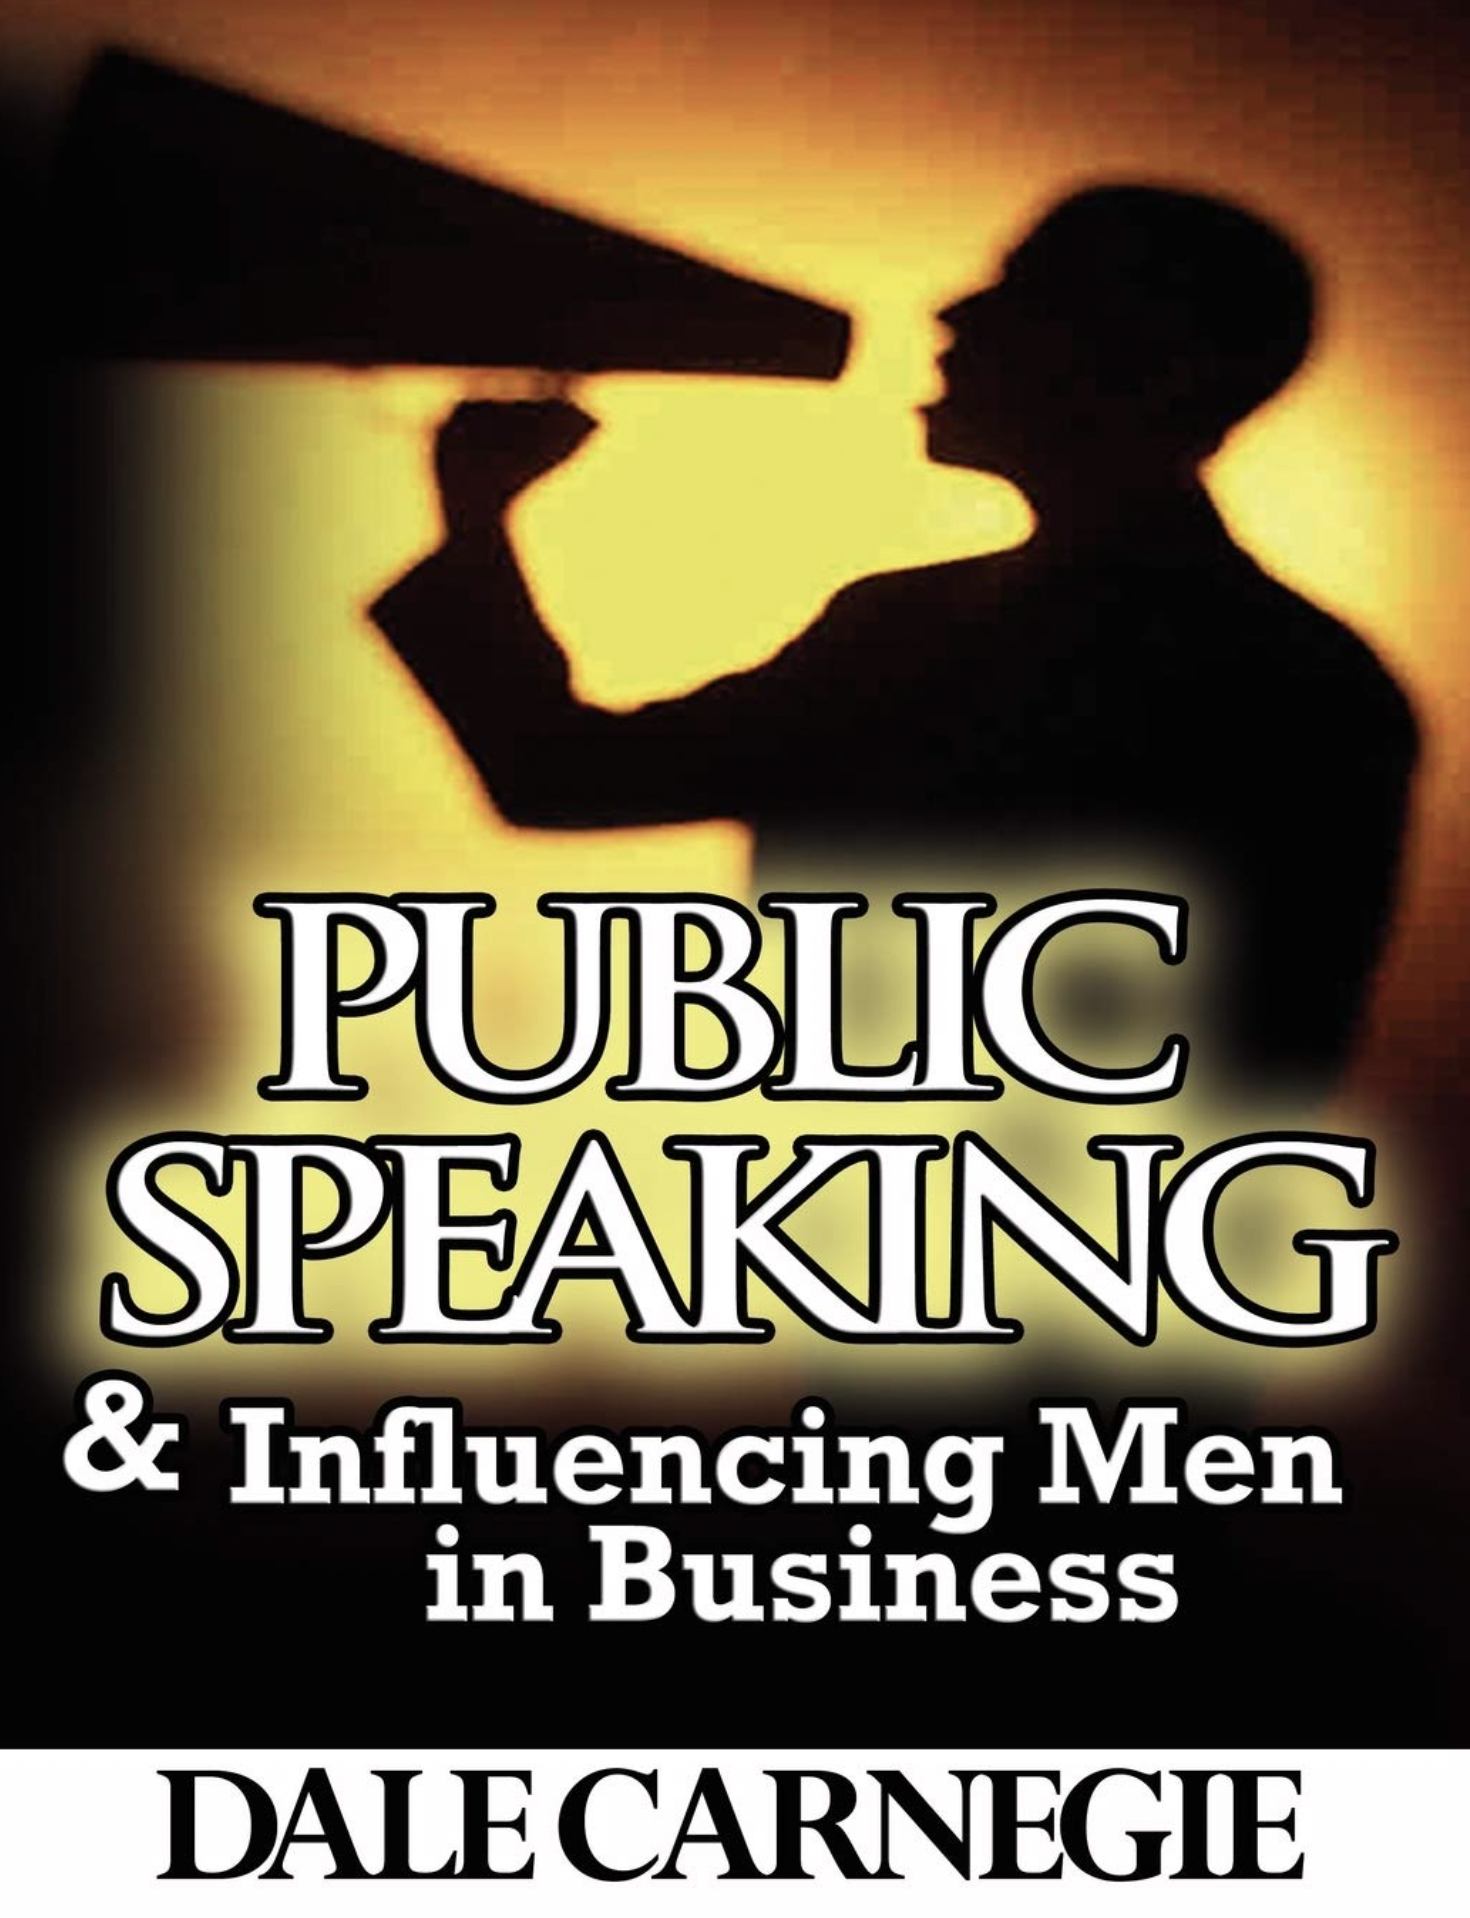 Public Speaking and Influencing Men in Business by Dale Carnegie